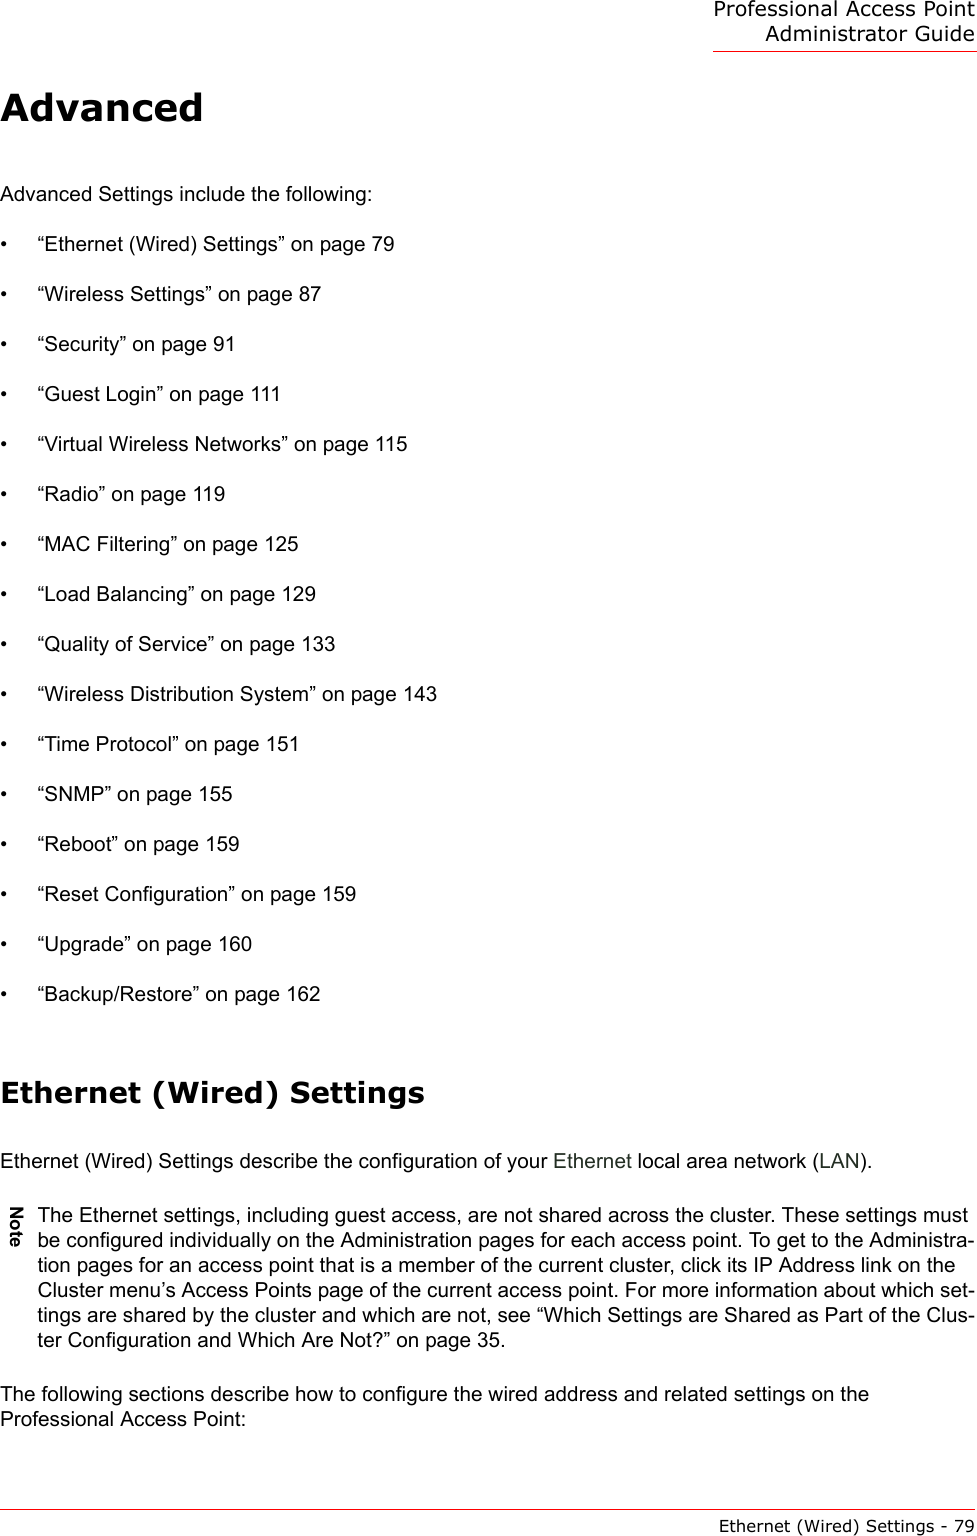 Professional Access Point Administrator GuideEthernet (Wired) Settings - 79AdvancedAdvanced Settings include the following:•“Ethernet (Wired) Settings” on page 79•“Wireless Settings” on page 87•“Security” on page 91•“Guest Login” on page 111•“Virtual Wireless Networks” on page 115•“Radio” on page 119•“MAC Filtering” on page 125•“Load Balancing” on page 129•“Quality of Service” on page 133•“Wireless Distribution System” on page 143•“Time Protocol” on page 151•“SNMP” on page 155•“Reboot” on page 159•“Reset Configuration” on page 159•“Upgrade” on page 160•“Backup/Restore” on page 162Ethernet (Wired) SettingsEthernet (Wired) Settings describe the configuration of your Ethernet local area network (LAN).The following sections describe how to configure the wired address and related settings on the Professional Access Point:NoteThe Ethernet settings, including guest access, are not shared across the cluster. These settings must be configured individually on the Administration pages for each access point. To get to the Administra-tion pages for an access point that is a member of the current cluster, click its IP Address link on the Cluster menu’s Access Points page of the current access point. For more information about which set-tings are shared by the cluster and which are not, see “Which Settings are Shared as Part of the Clus-ter Configuration and Which Are Not?” on page 35.